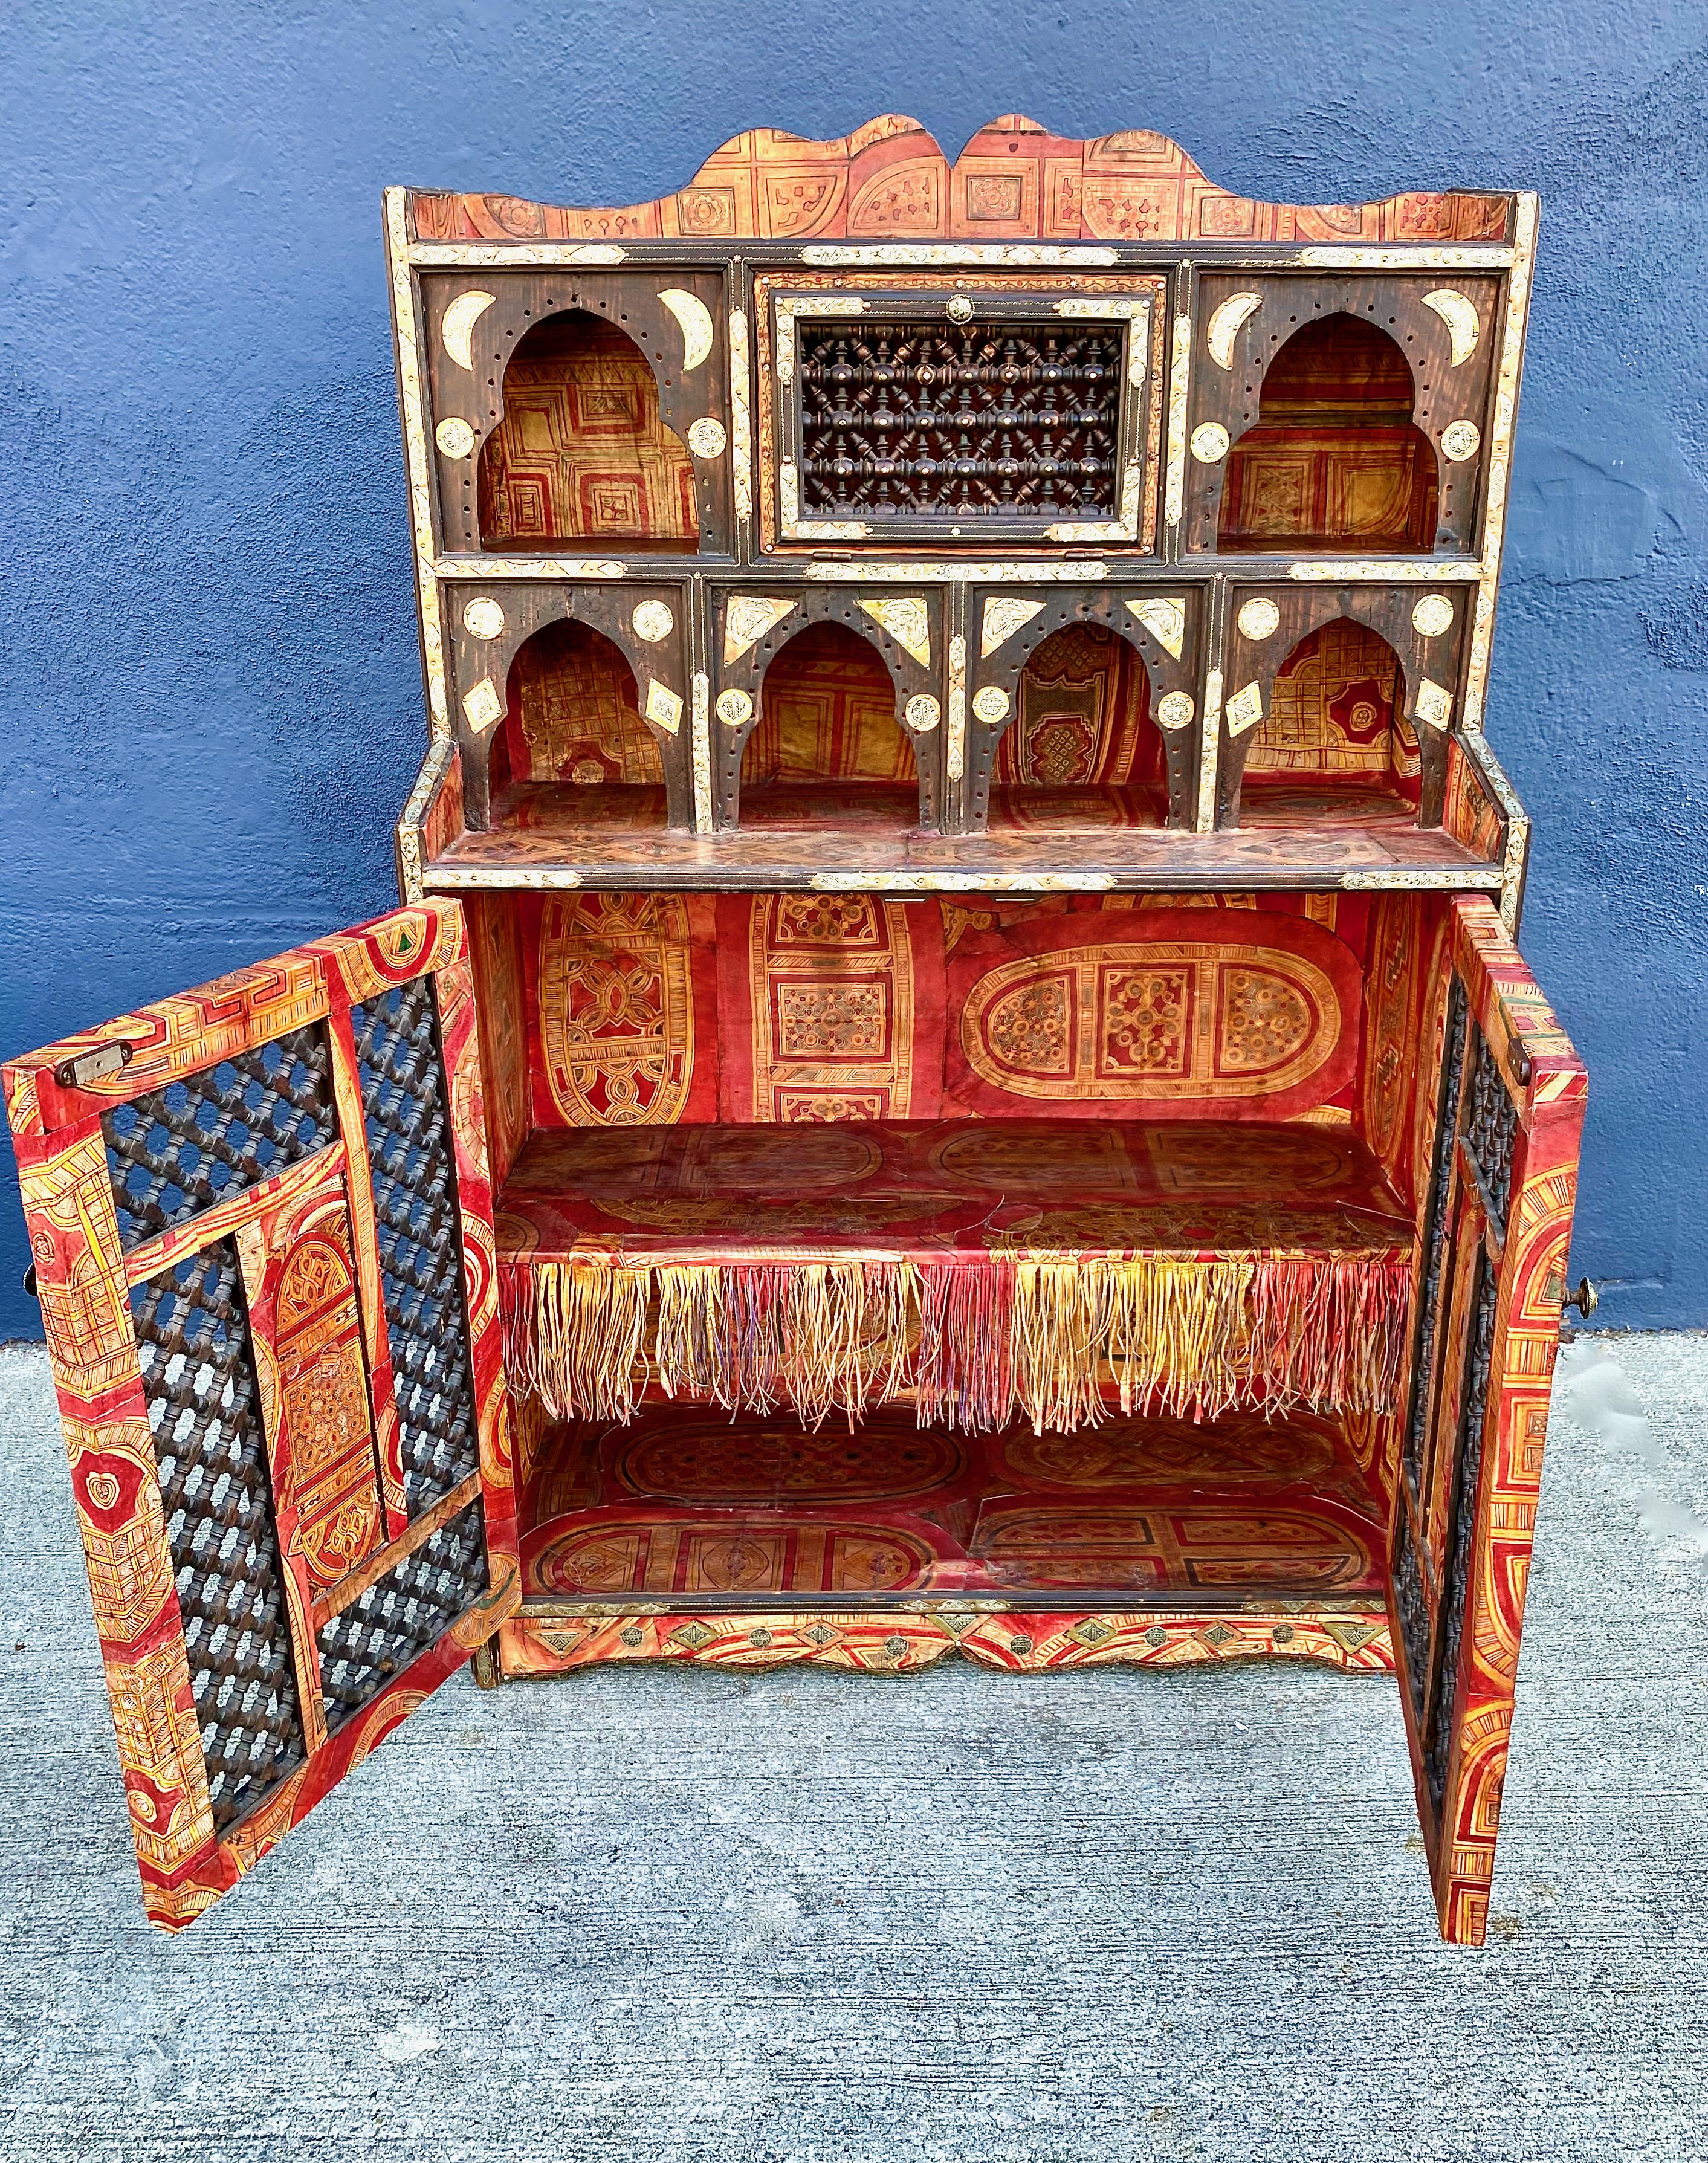 This is a wonderfully creative Levantine or Syrian cabinet that dates to the late 19th century. It's style is reminiscent of the work of Carlo Bugatti. This cabinet is intricately detailed in inlaid bone, metal, leather and lacquered paper; it even